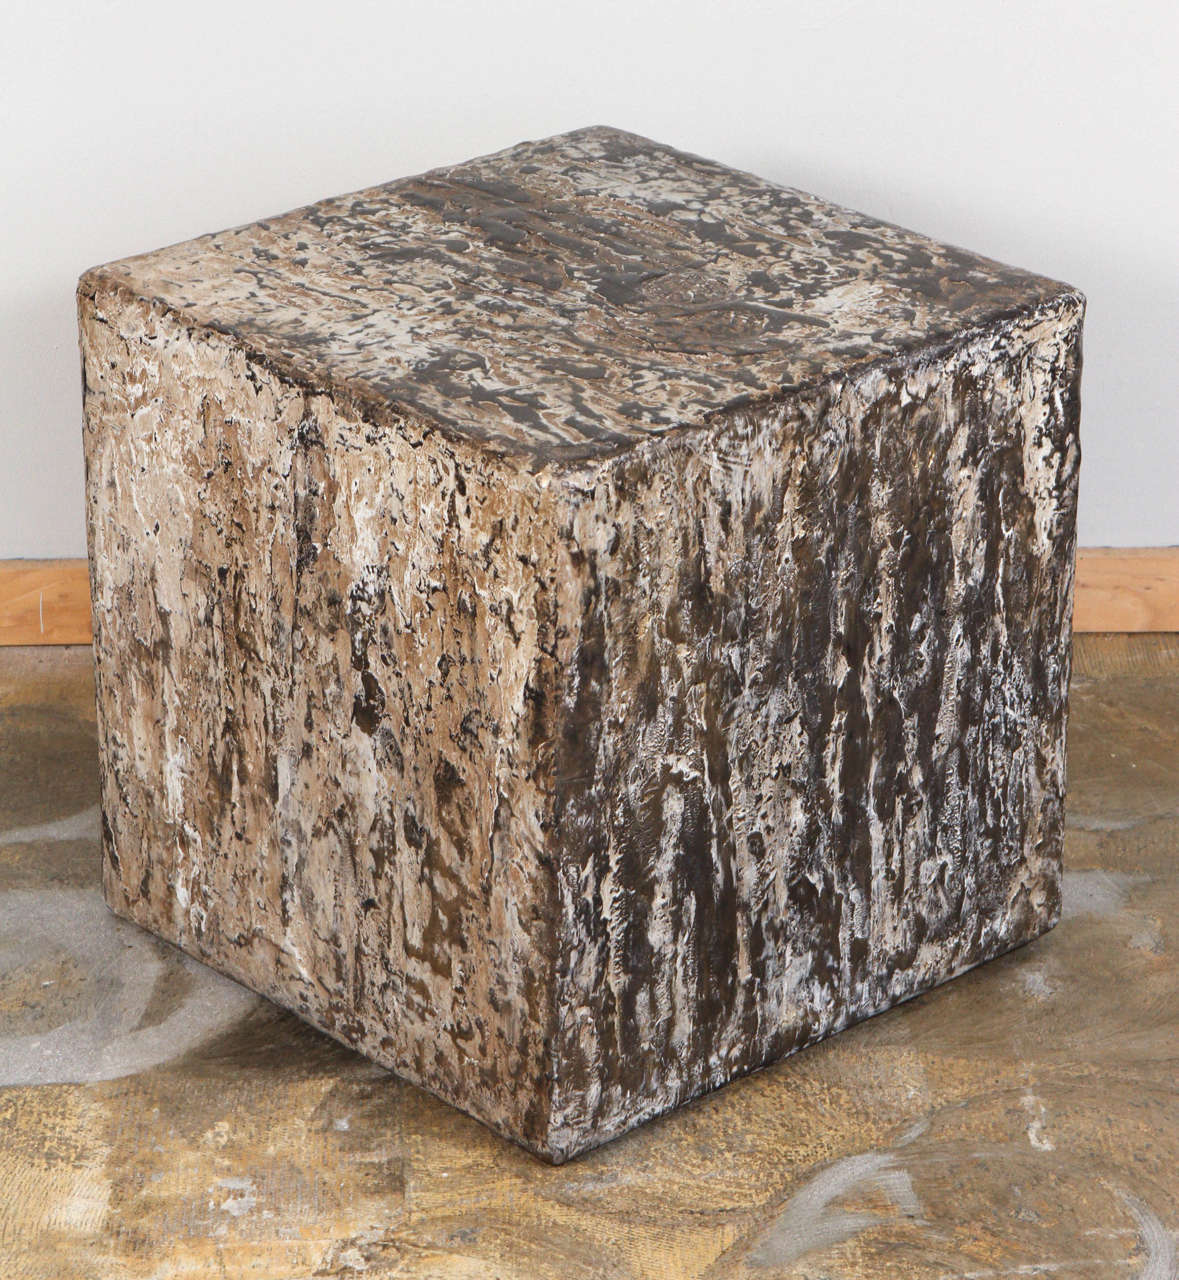 Resin, gold and mica combine resulting in unique textures on each side of this solid square table. Handmade and therefore all six sides are different and cannot be replicated exactly. A functional, sculptural art piece.